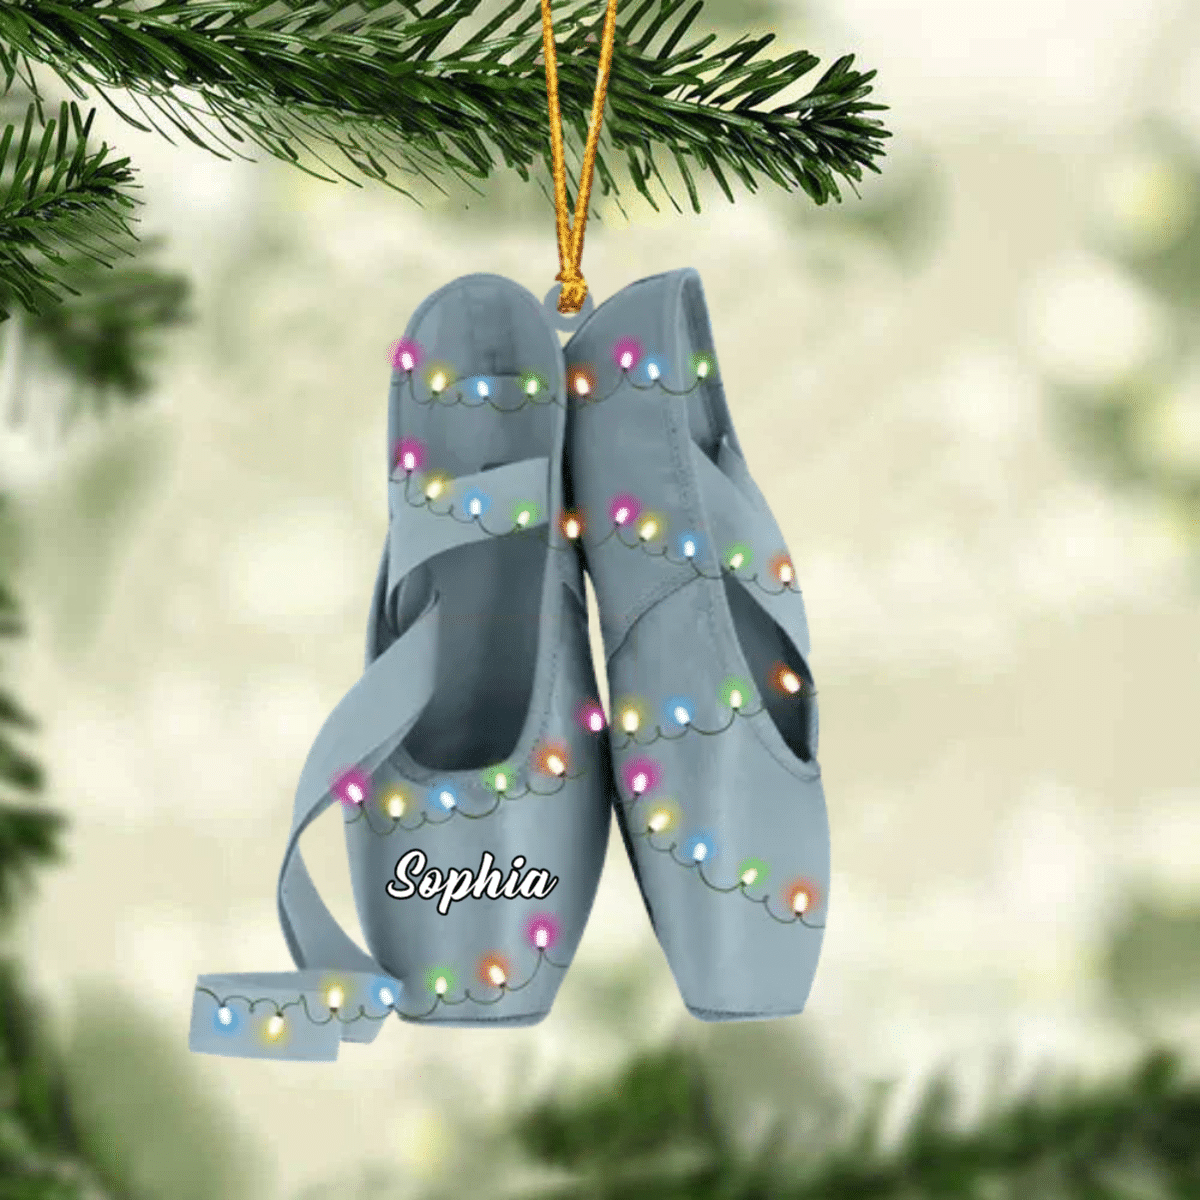 Ballet Pointe Shoes With Christmas Light - Personalized Christmas Ornament - Gift For Ballet Dancers